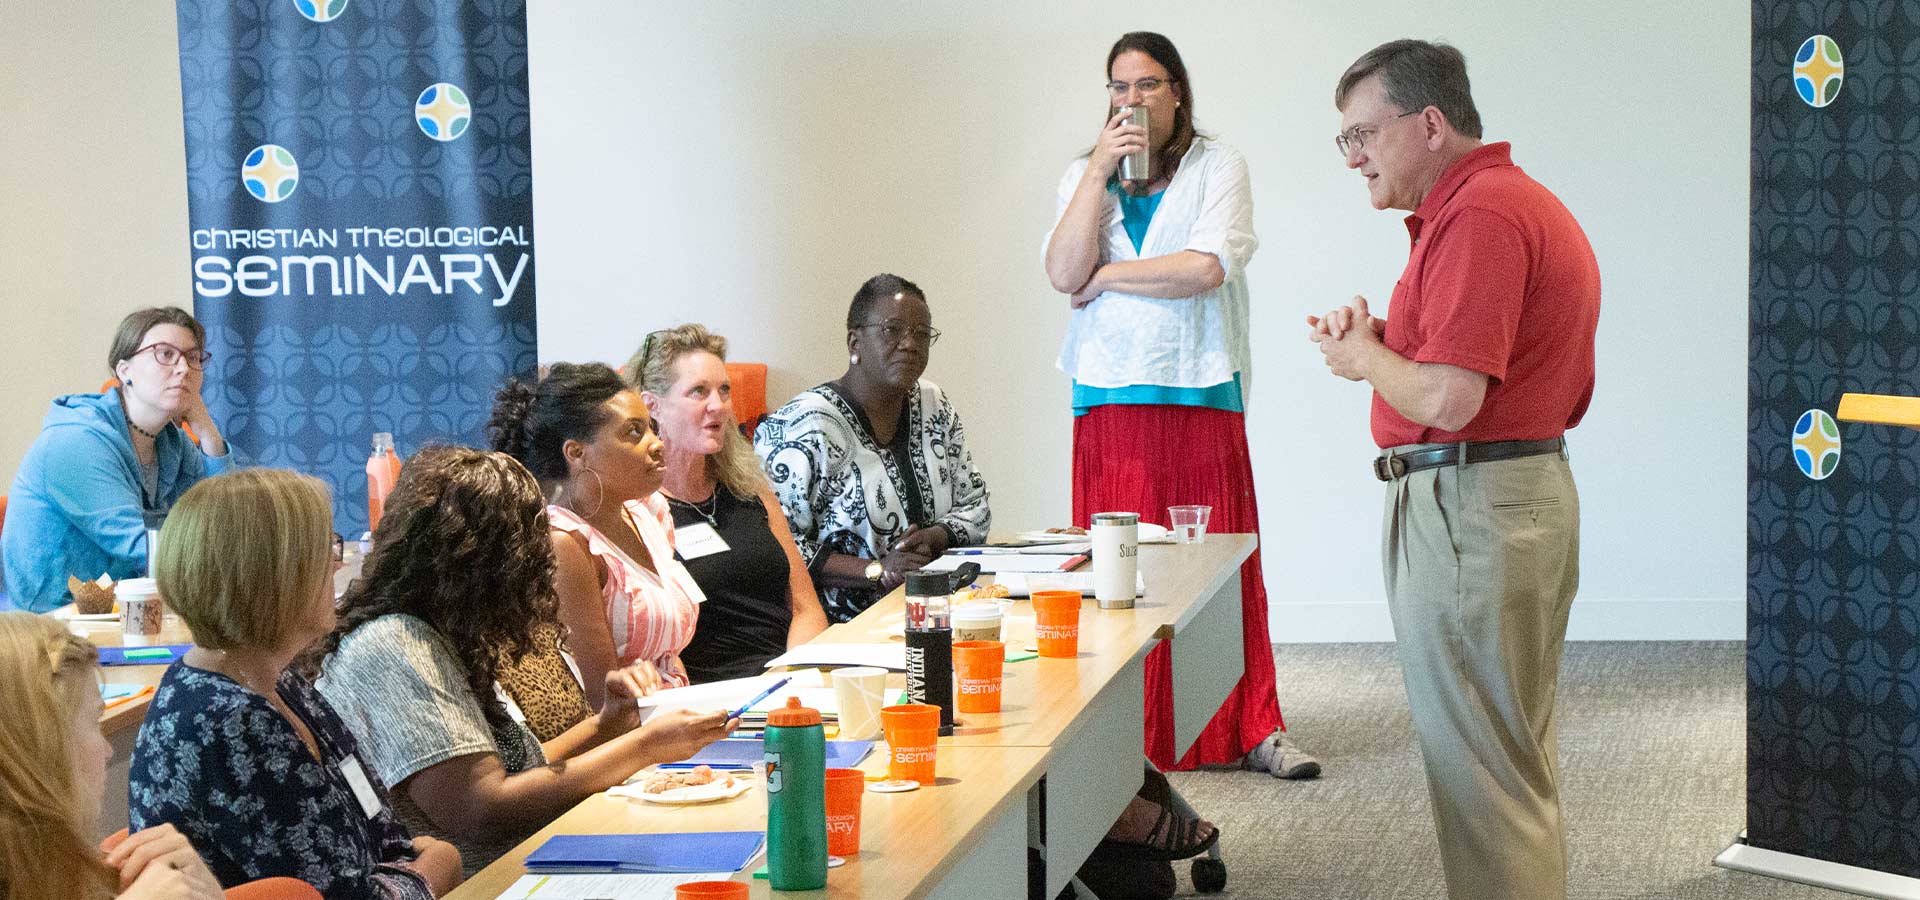 DMin Program Evolves to Meet the Challenges of Church and Community Leadership